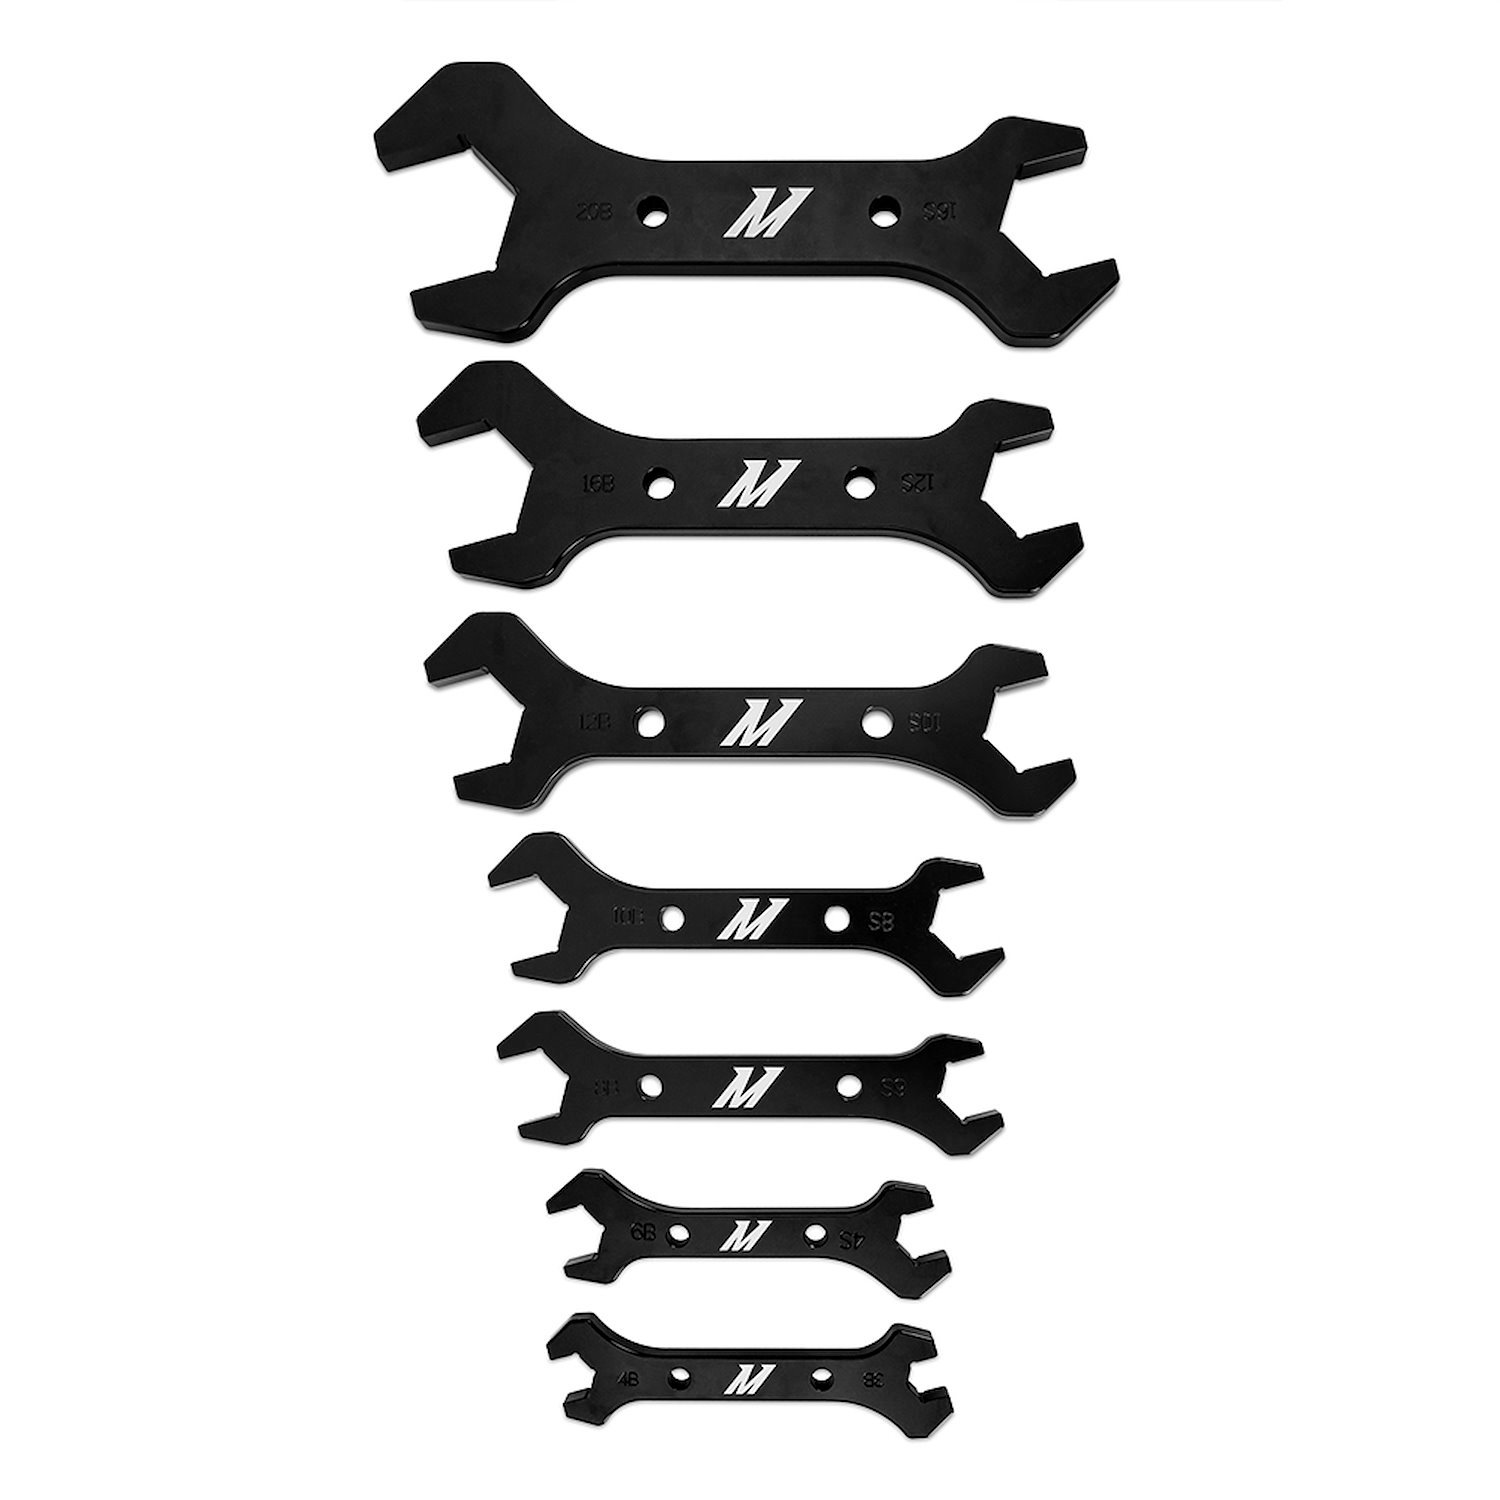 MMTL-ANSET-7D -AN Fitting and Line Assembly Wrench Set